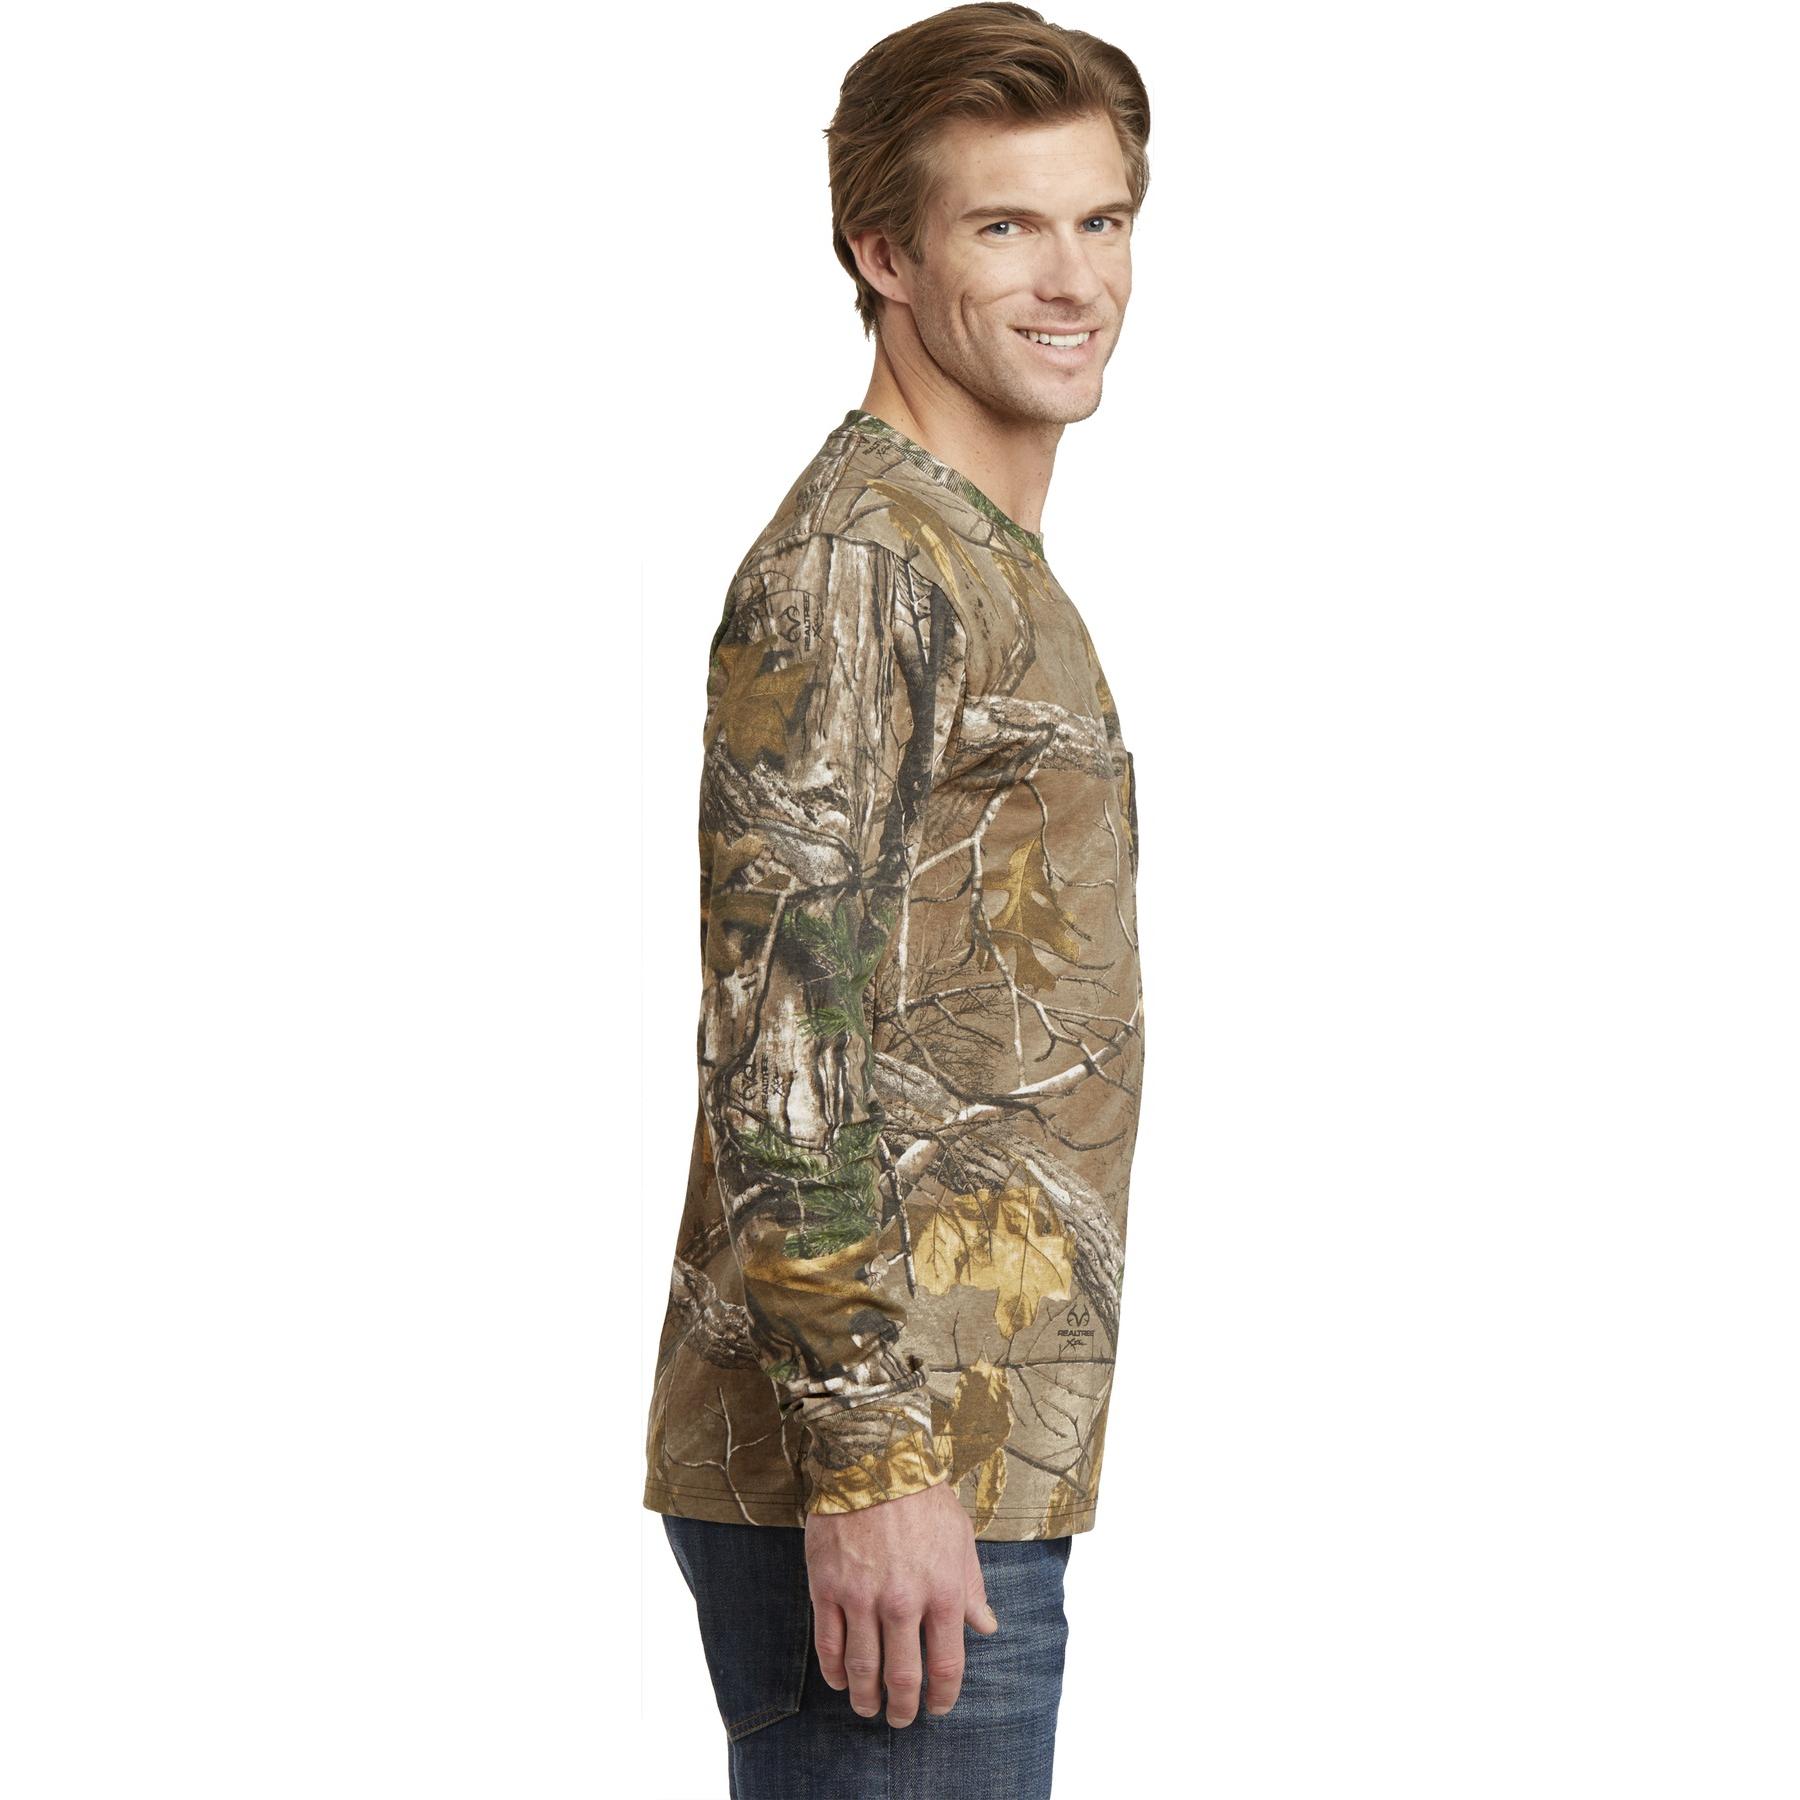 Russell Outdoors Realtree Long Sleeve Explorer 100% Cotton T-Shirt with Pocket - S020R - Realtree Xtra, S